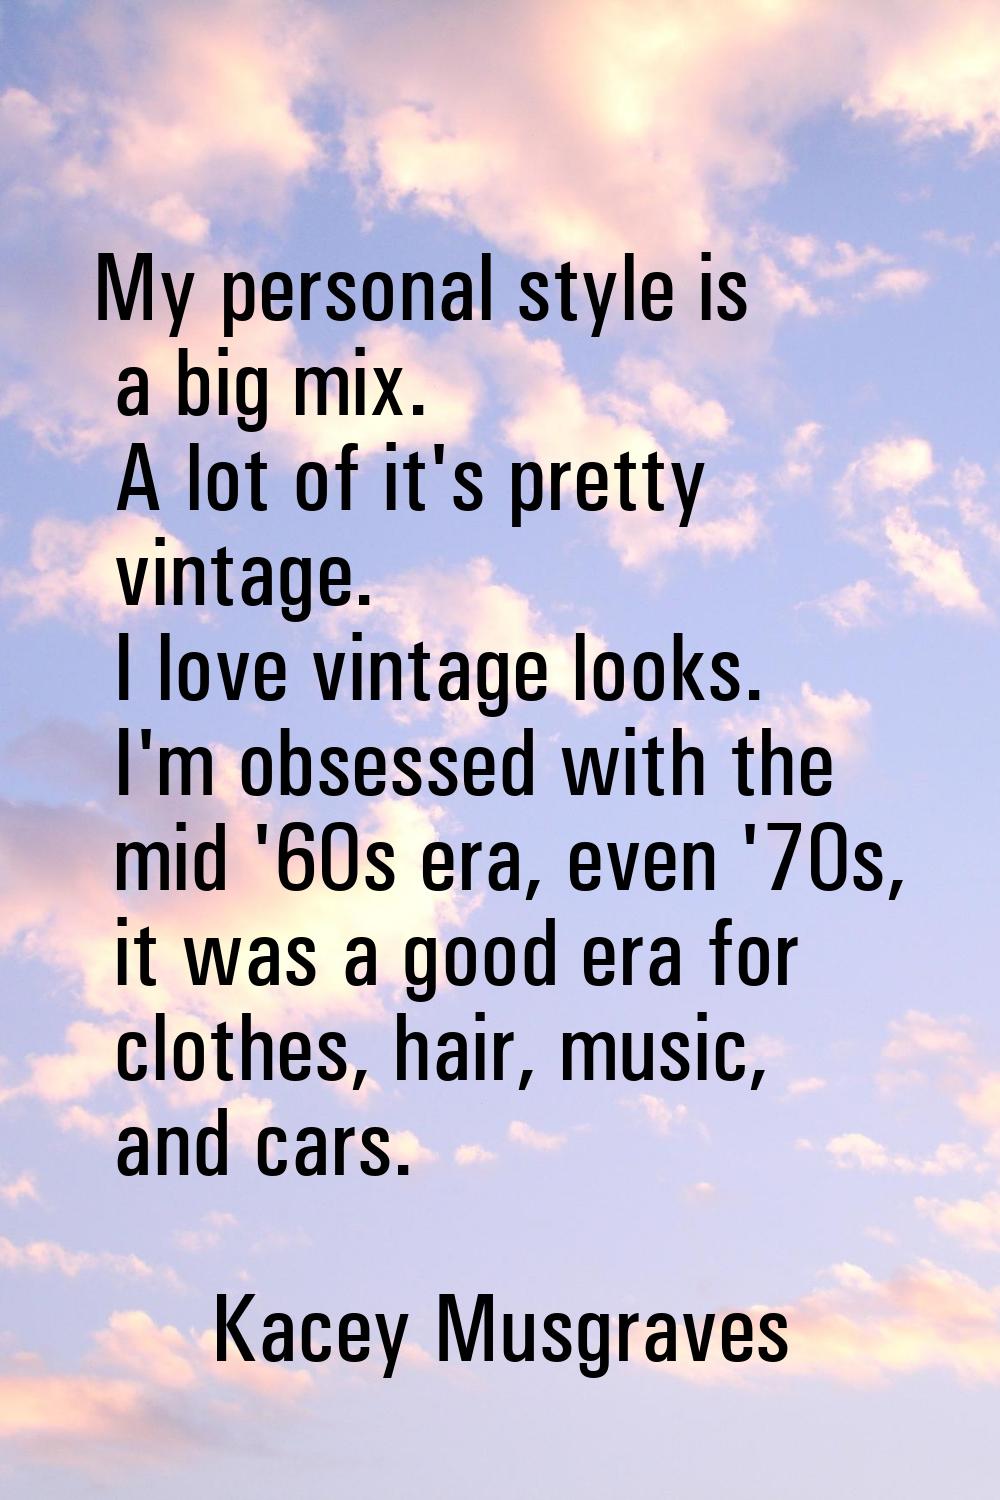 My personal style is a big mix. A lot of it's pretty vintage. I love vintage looks. I'm obsessed wi